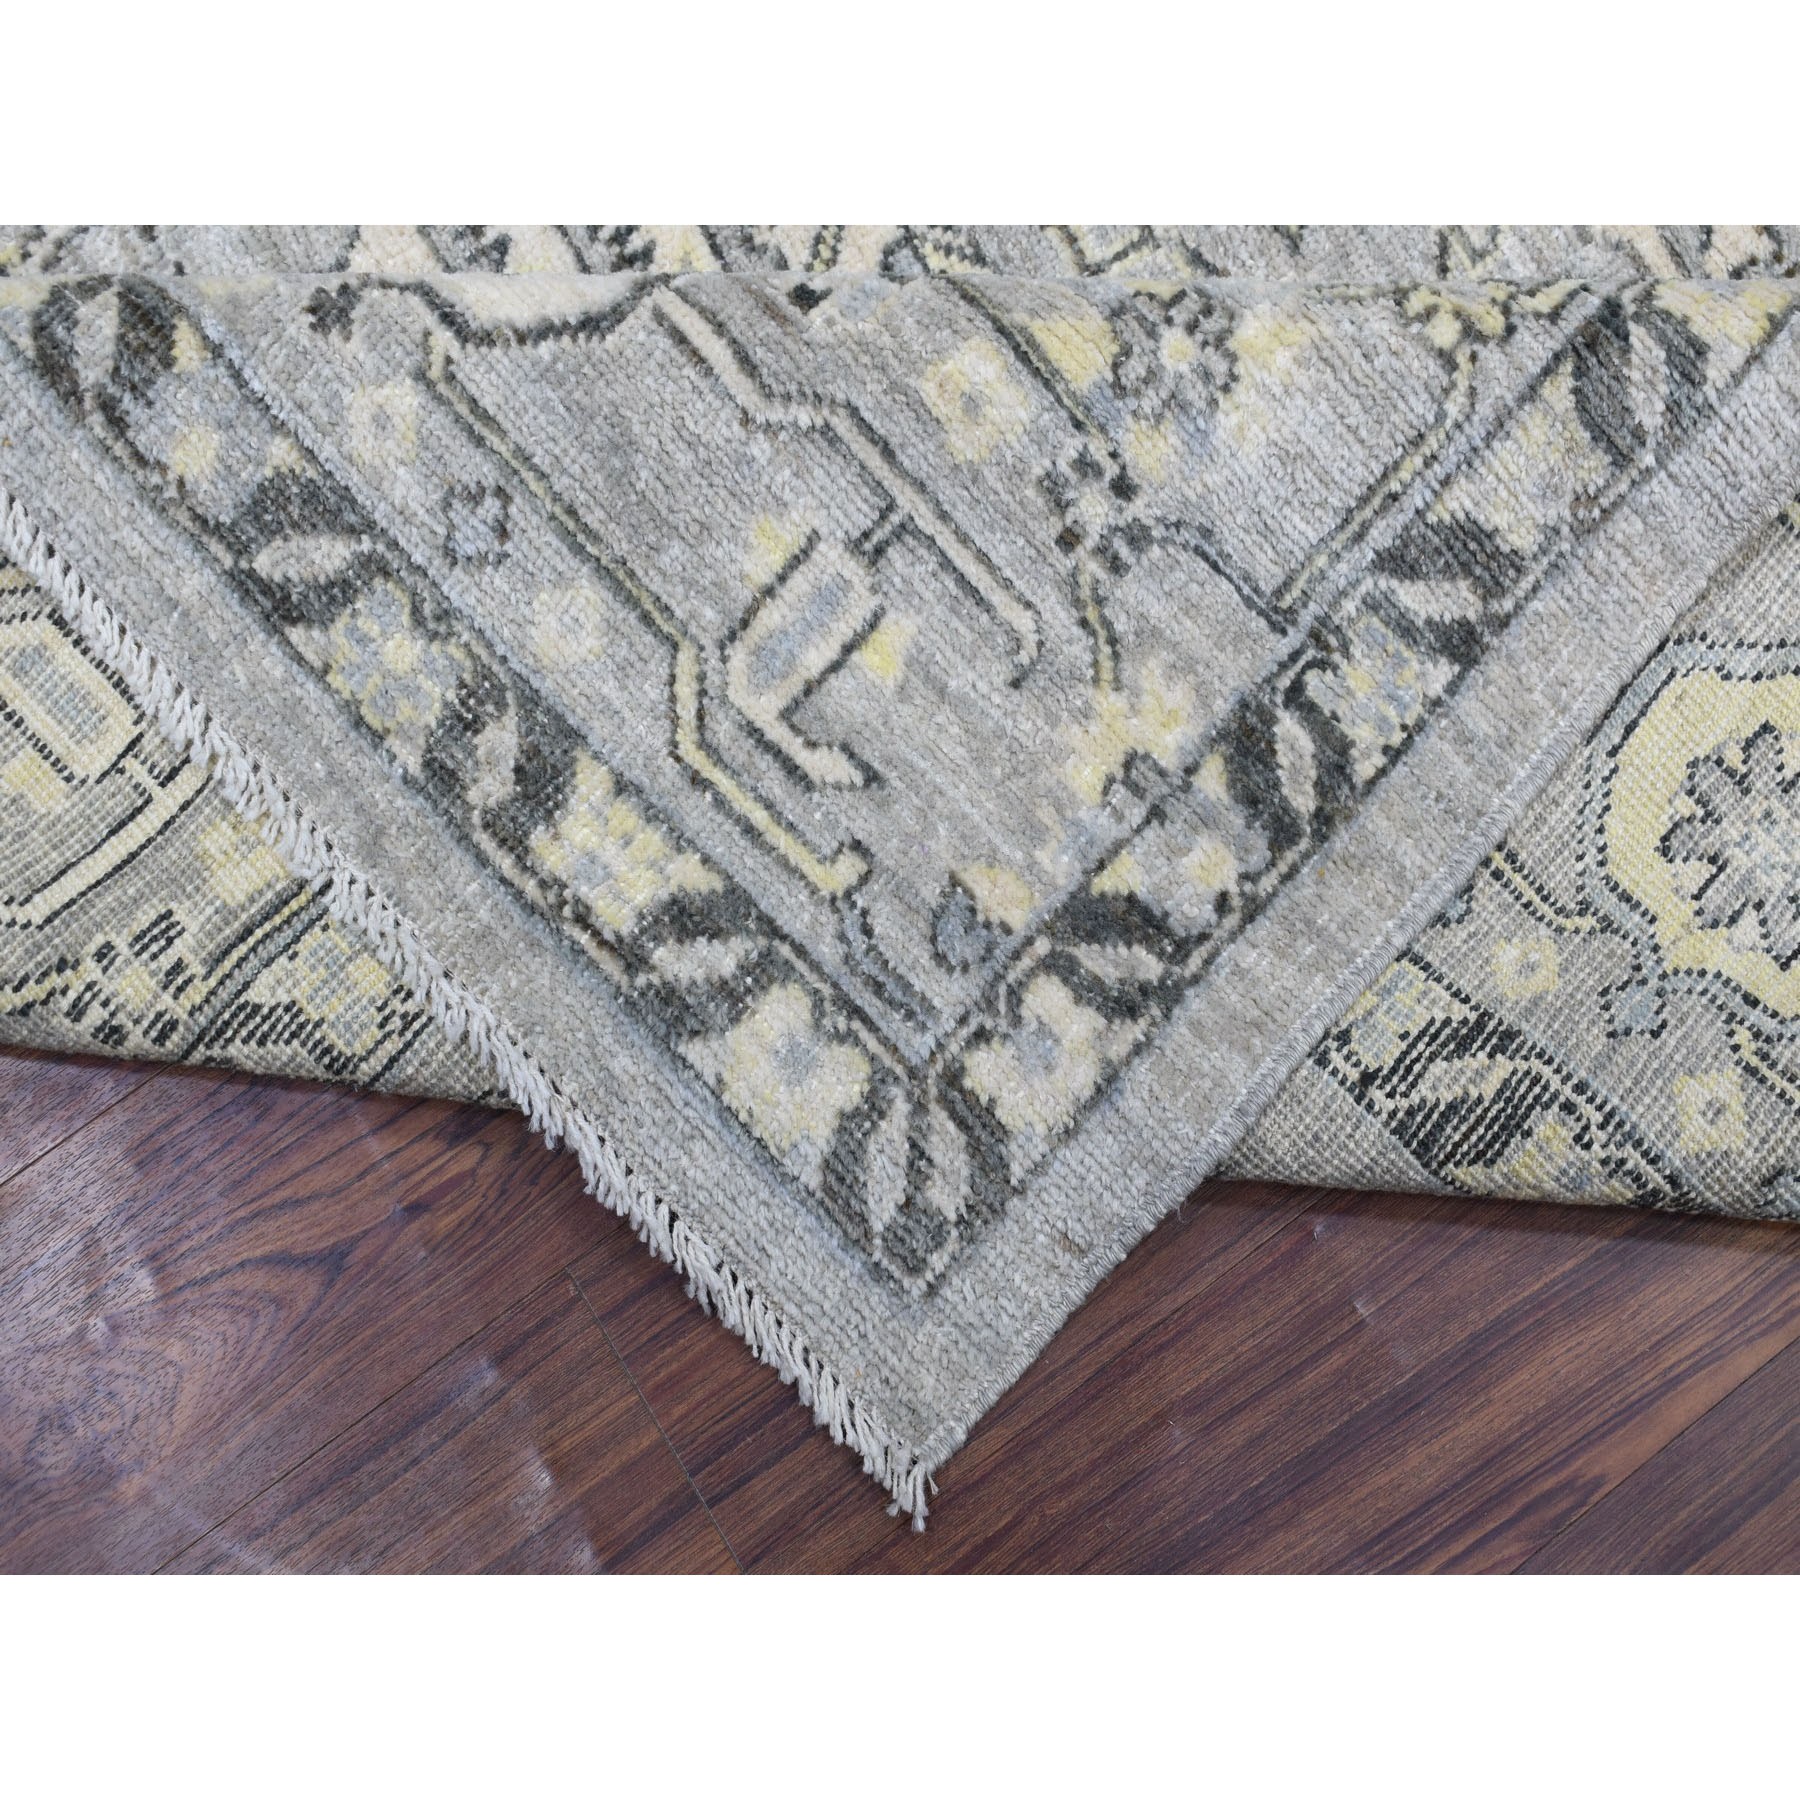 8'x9'9" Light Gray Angora Oushak with Tribal Design Extra Soft Wool Hand Woven Oriental Rug 